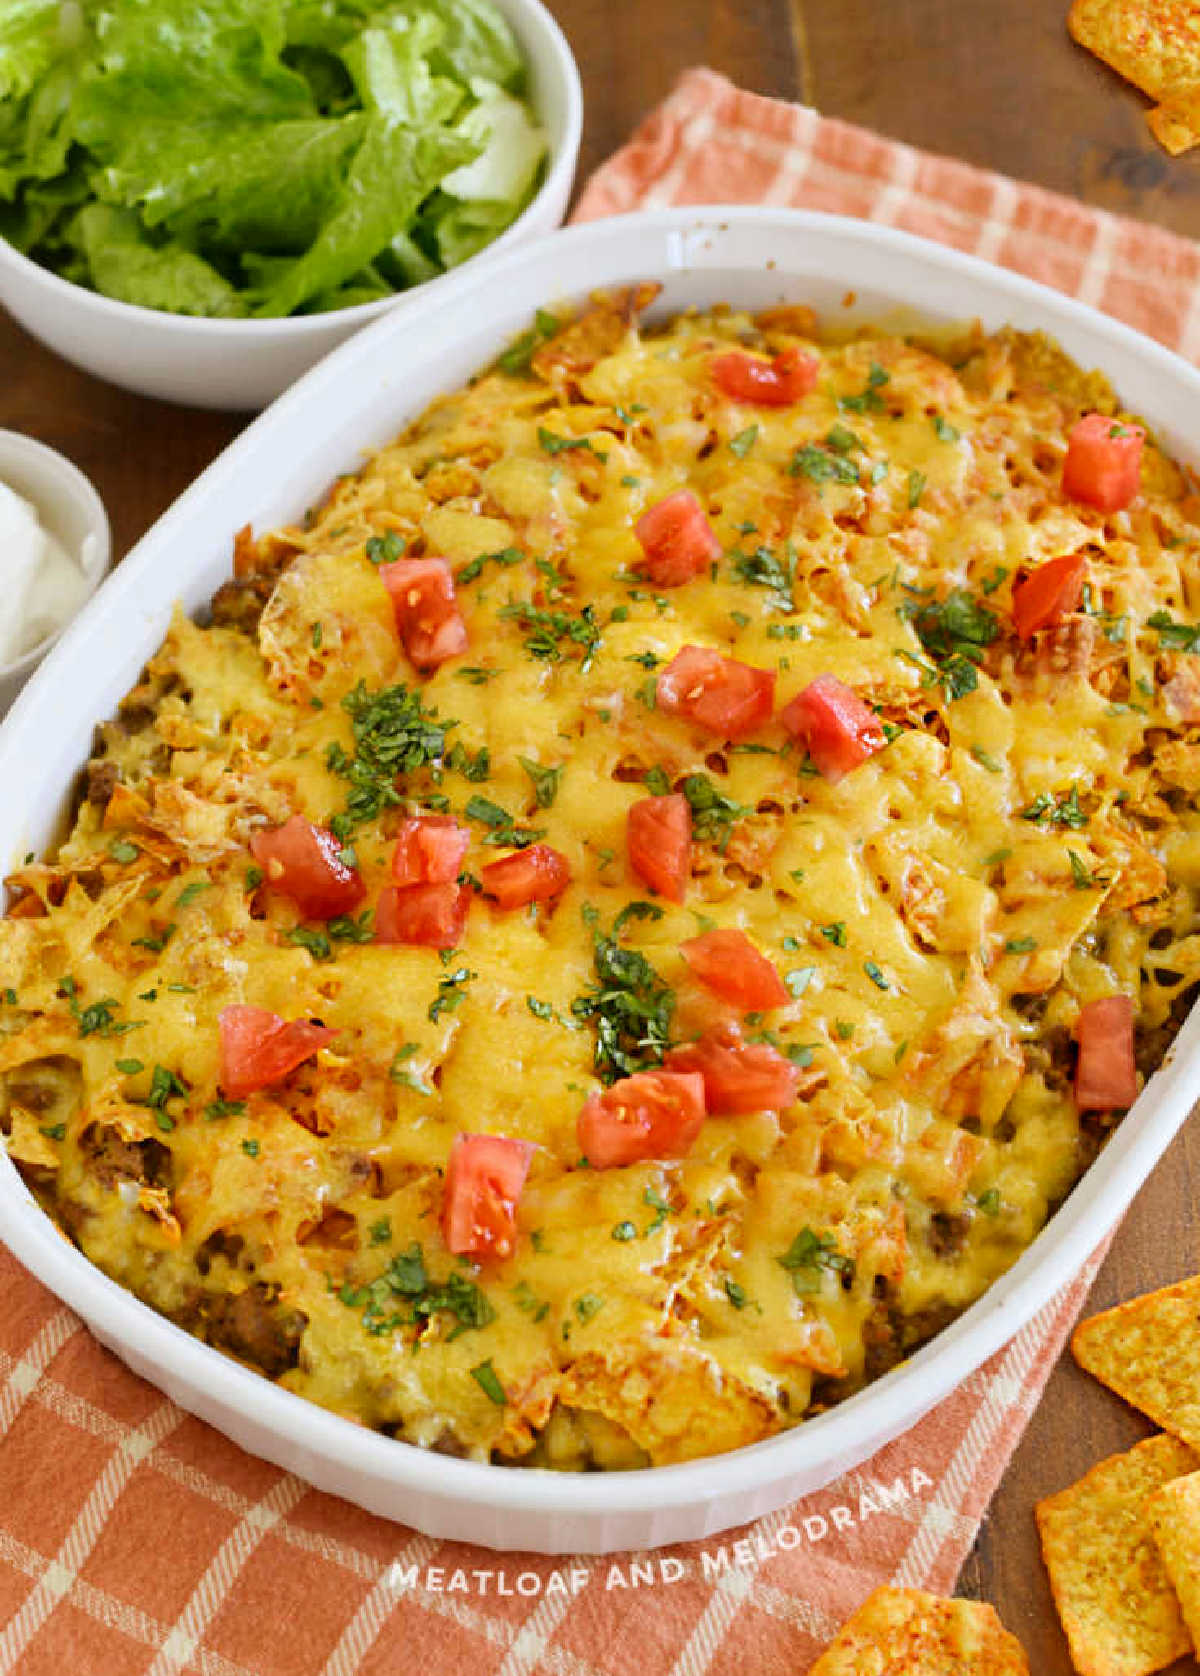 doritos casserole with ground beef, cheese, tomatoes and cilantro